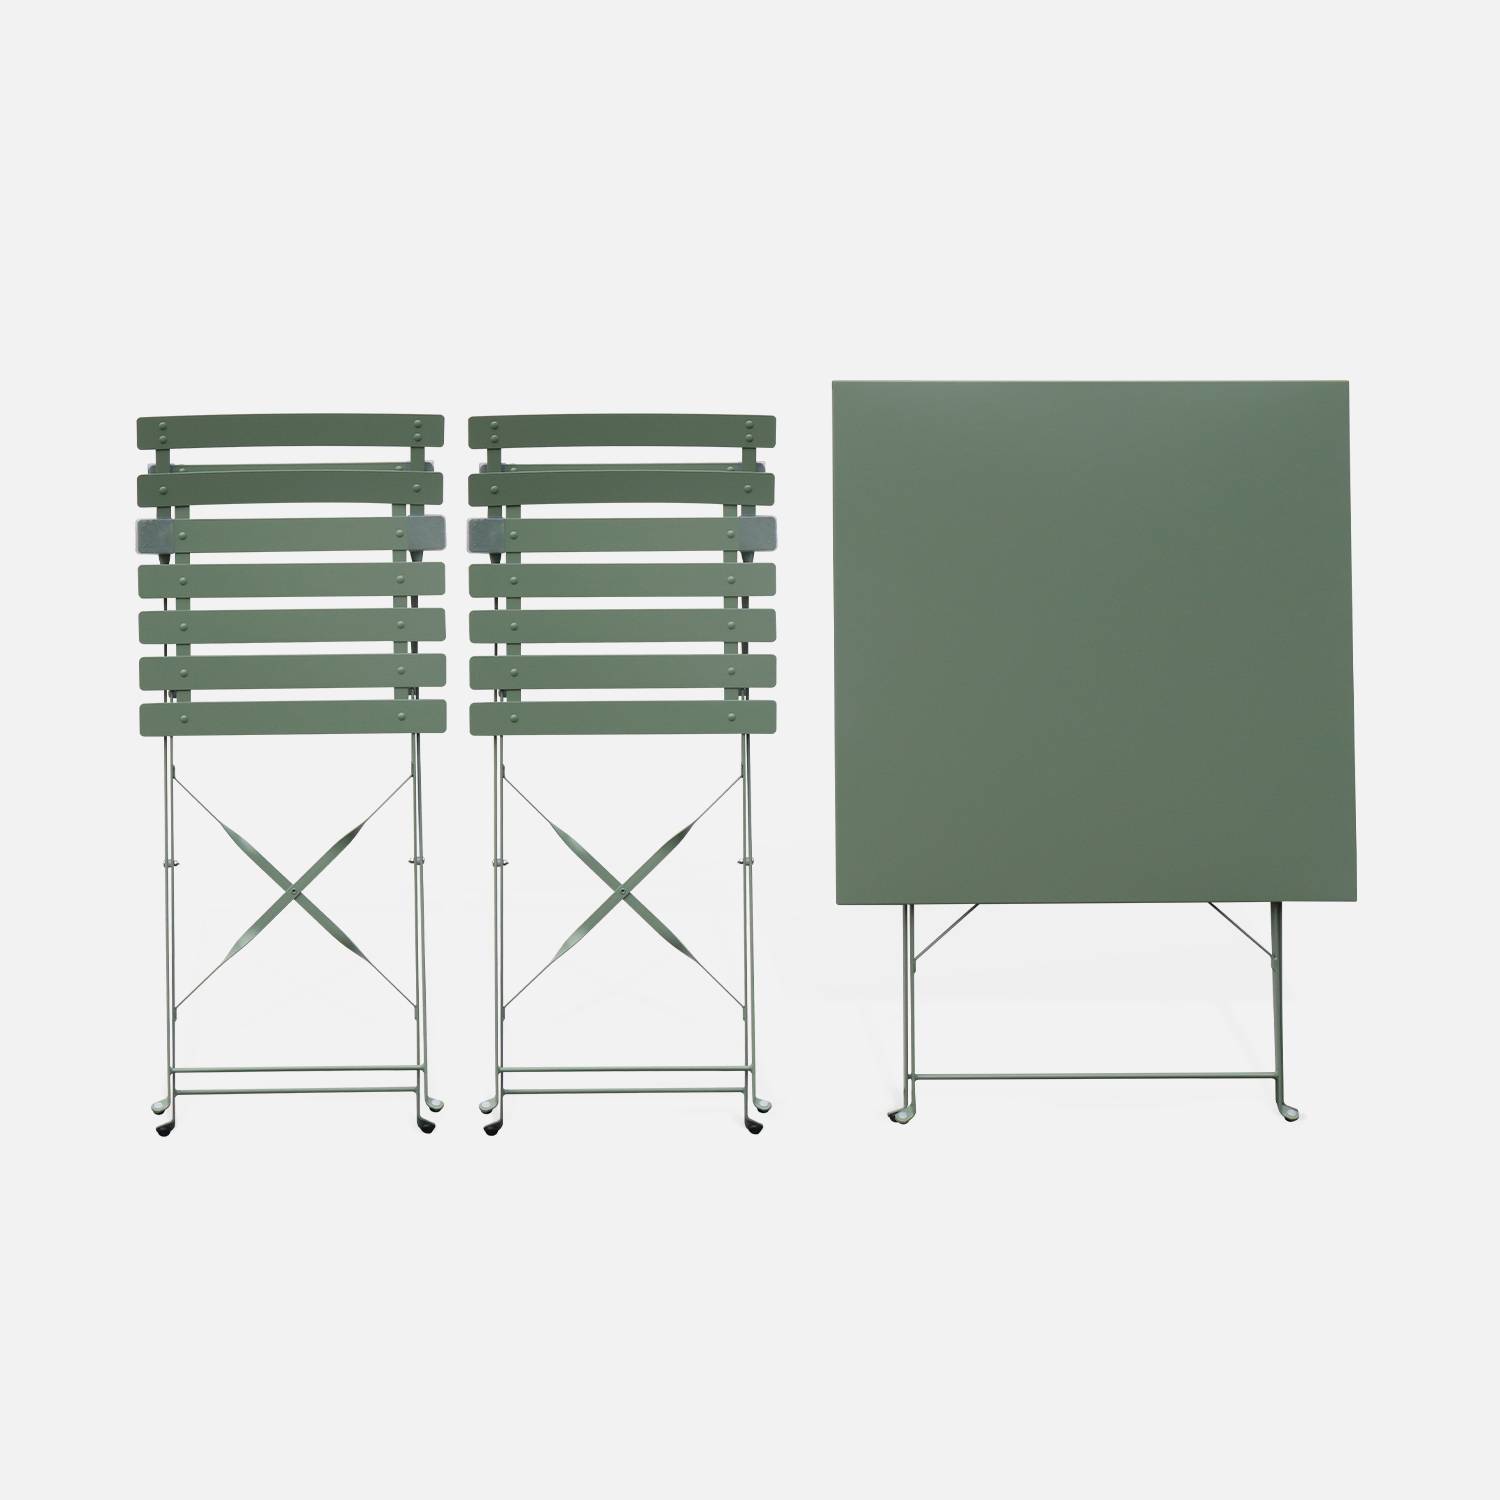 2-seater foldable thermo-lacquered steel bistro garden table with chairs, 70x70cm - Emilia - Sage geen,sweeek,Photo6